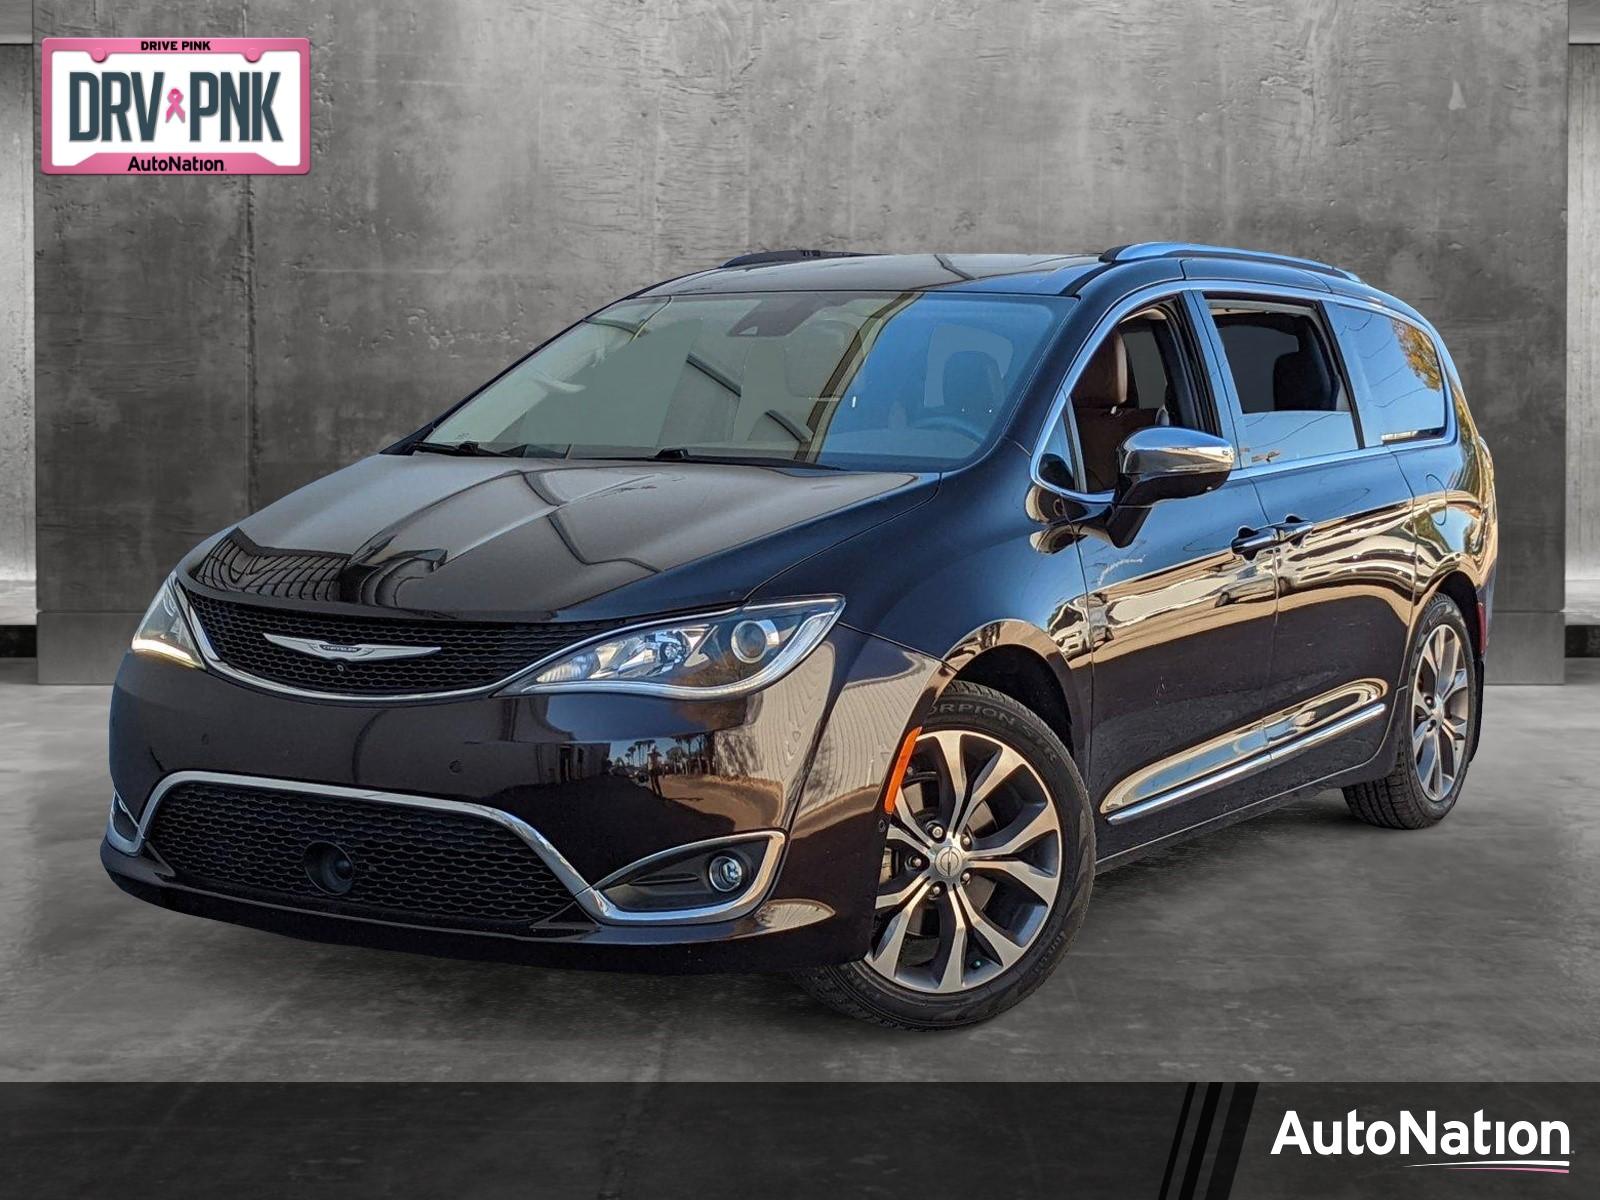 2017 Chrysler Pacifica Vehicle Photo in Tampa, FL 33614